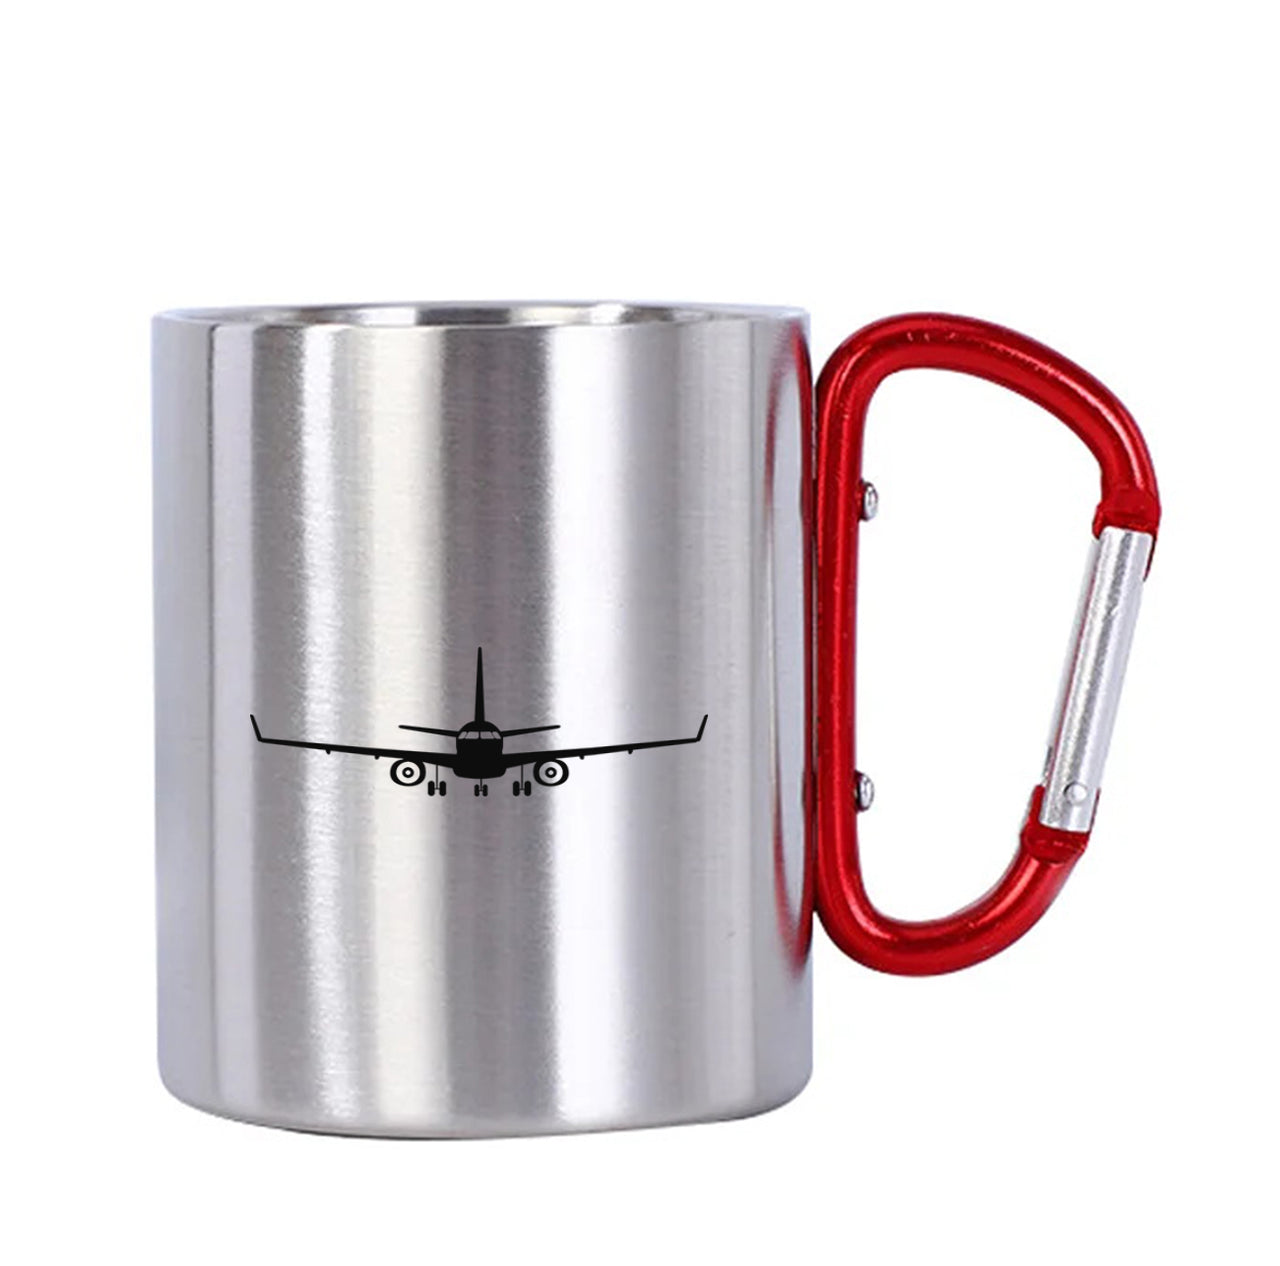 Embraer E-190 Silhouette Plane Designed Stainless Steel Outdoors Mugs